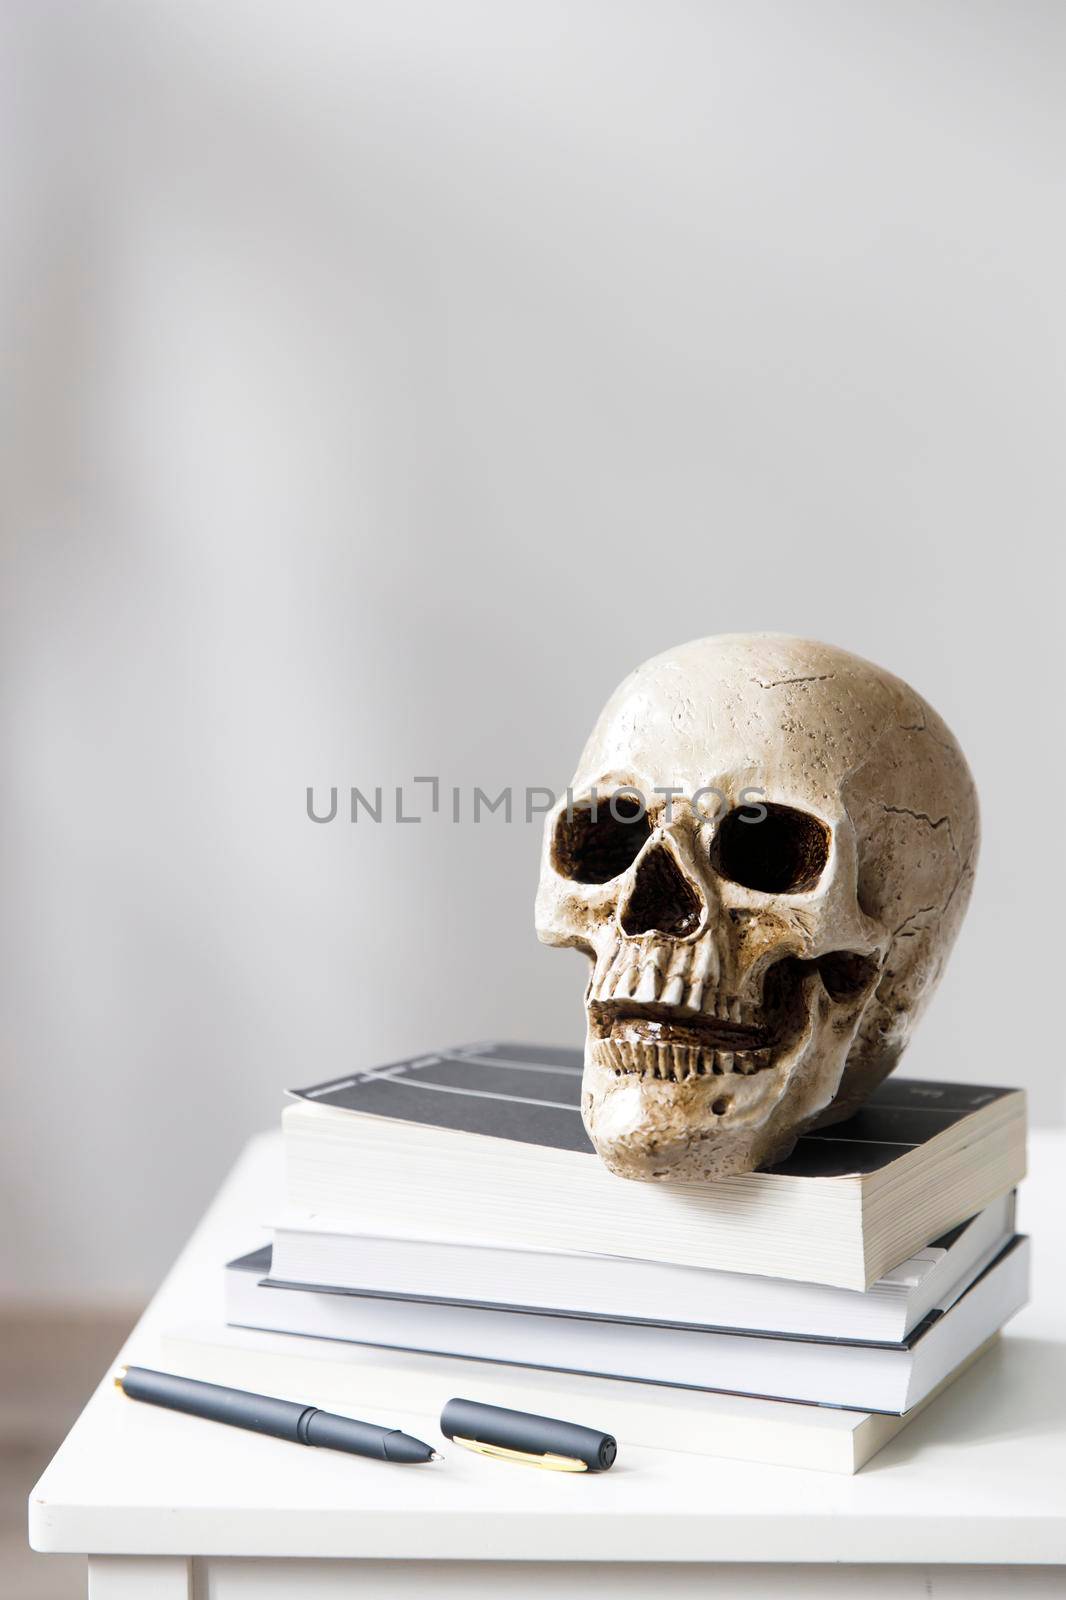 Pile of the book with a human plastic skull is over white background